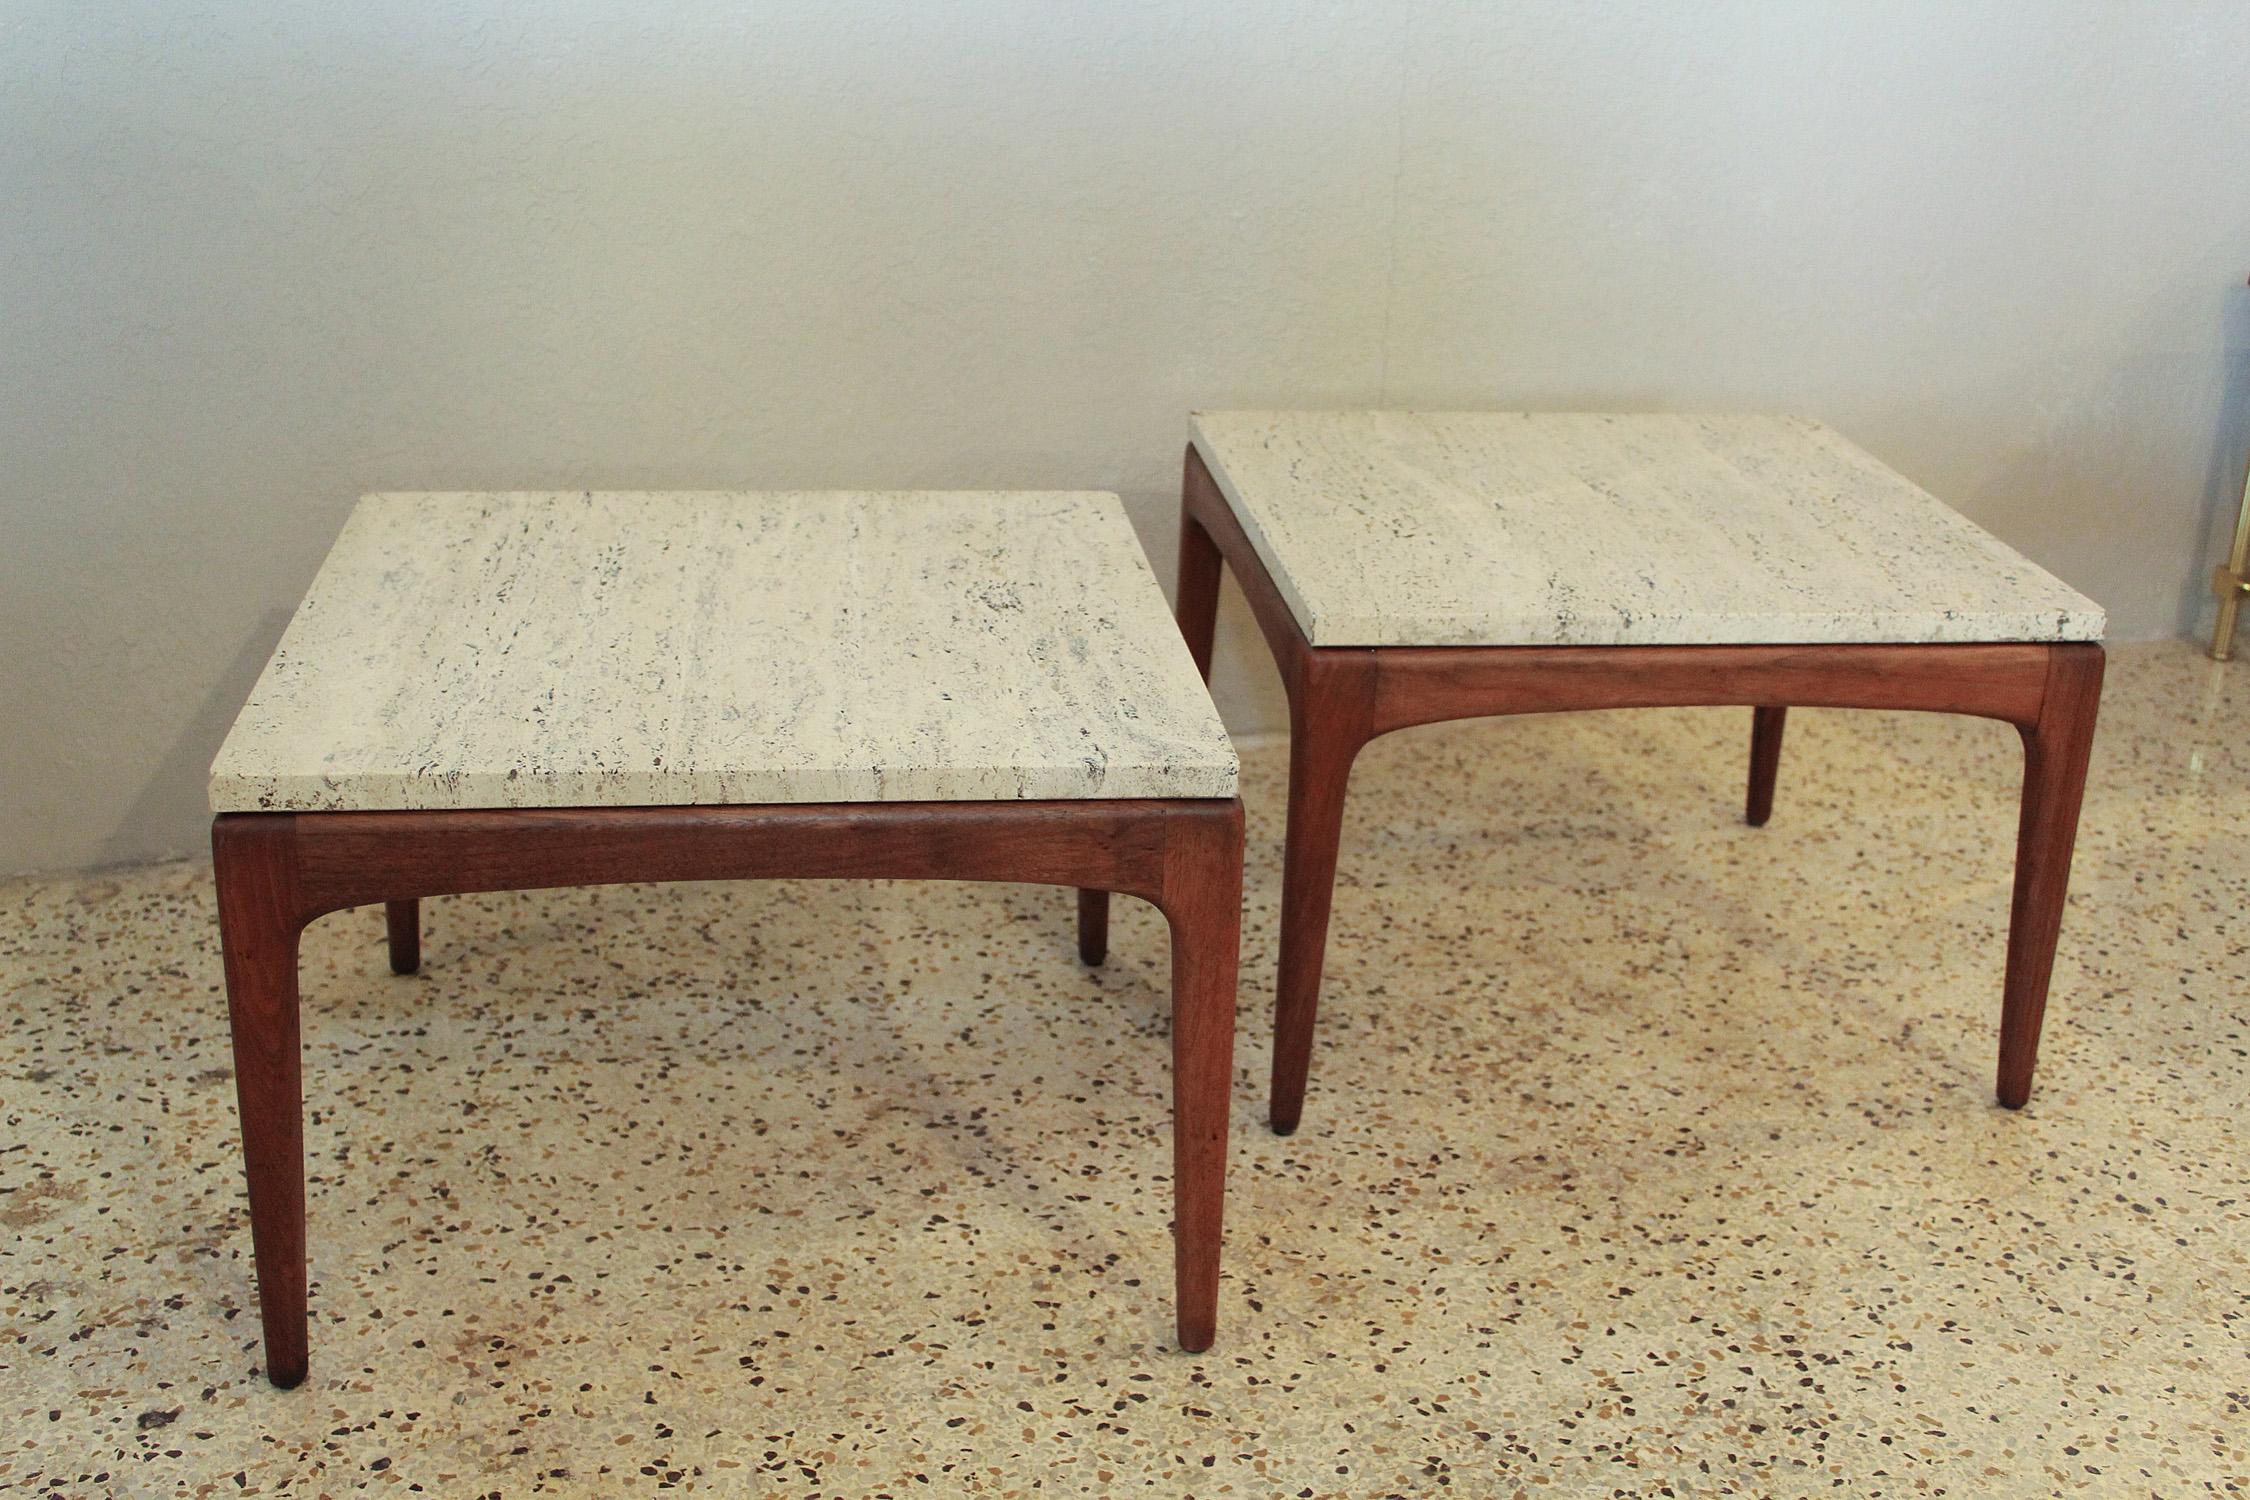 Refined simplicity define this clean-lined pair of 1960s Mid-Century Modern Italian teak side tables with original travertine tops.